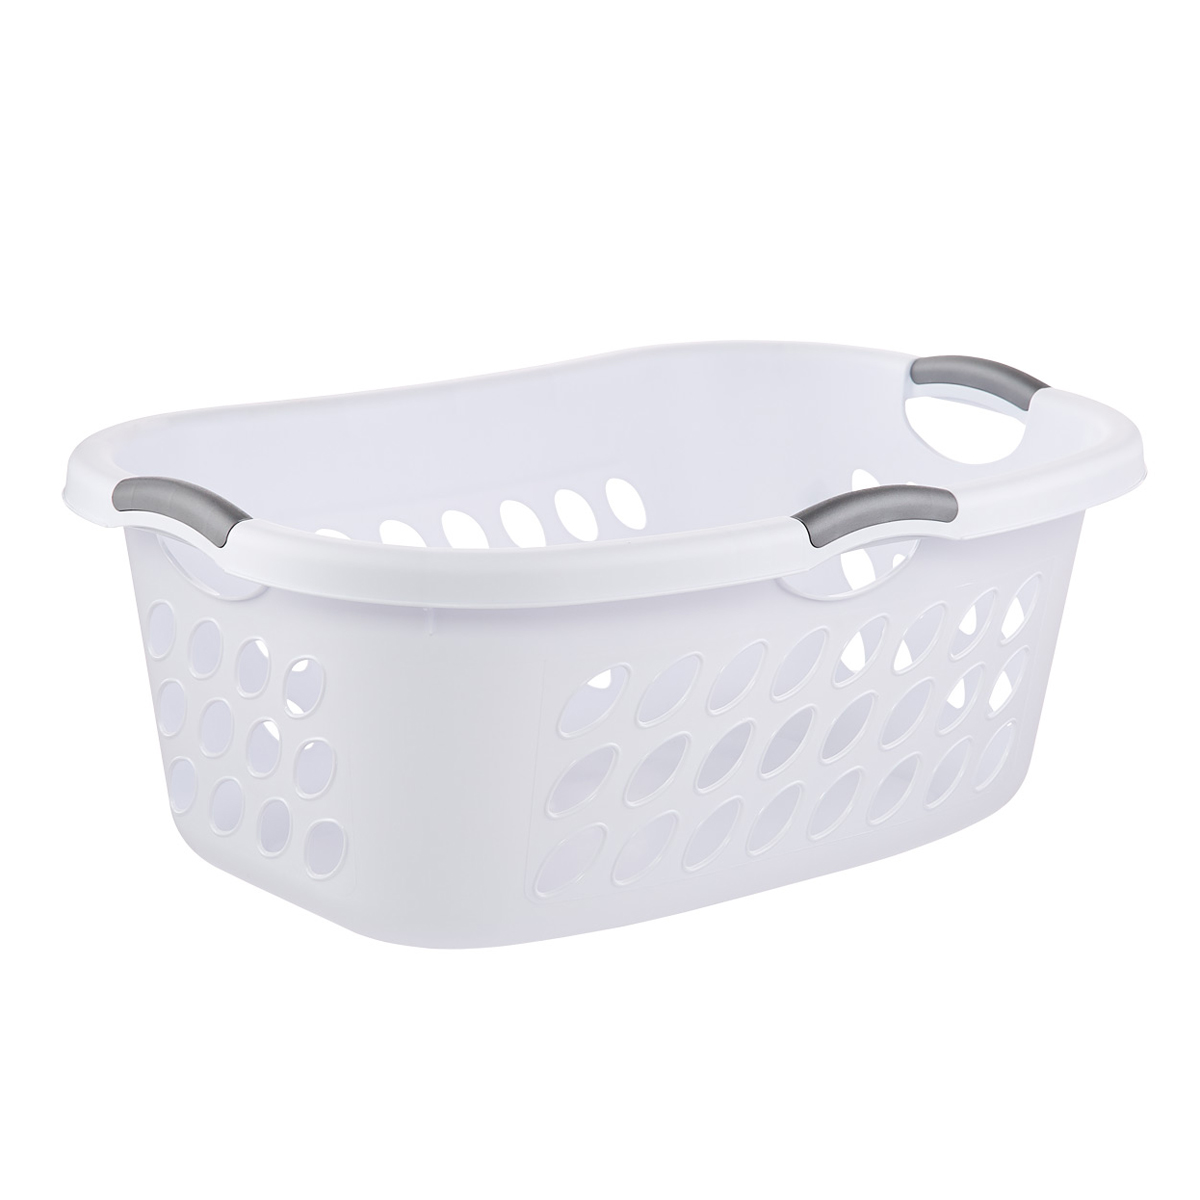 Sterilite Ultra HipHold Laundry Basket | The Container Store